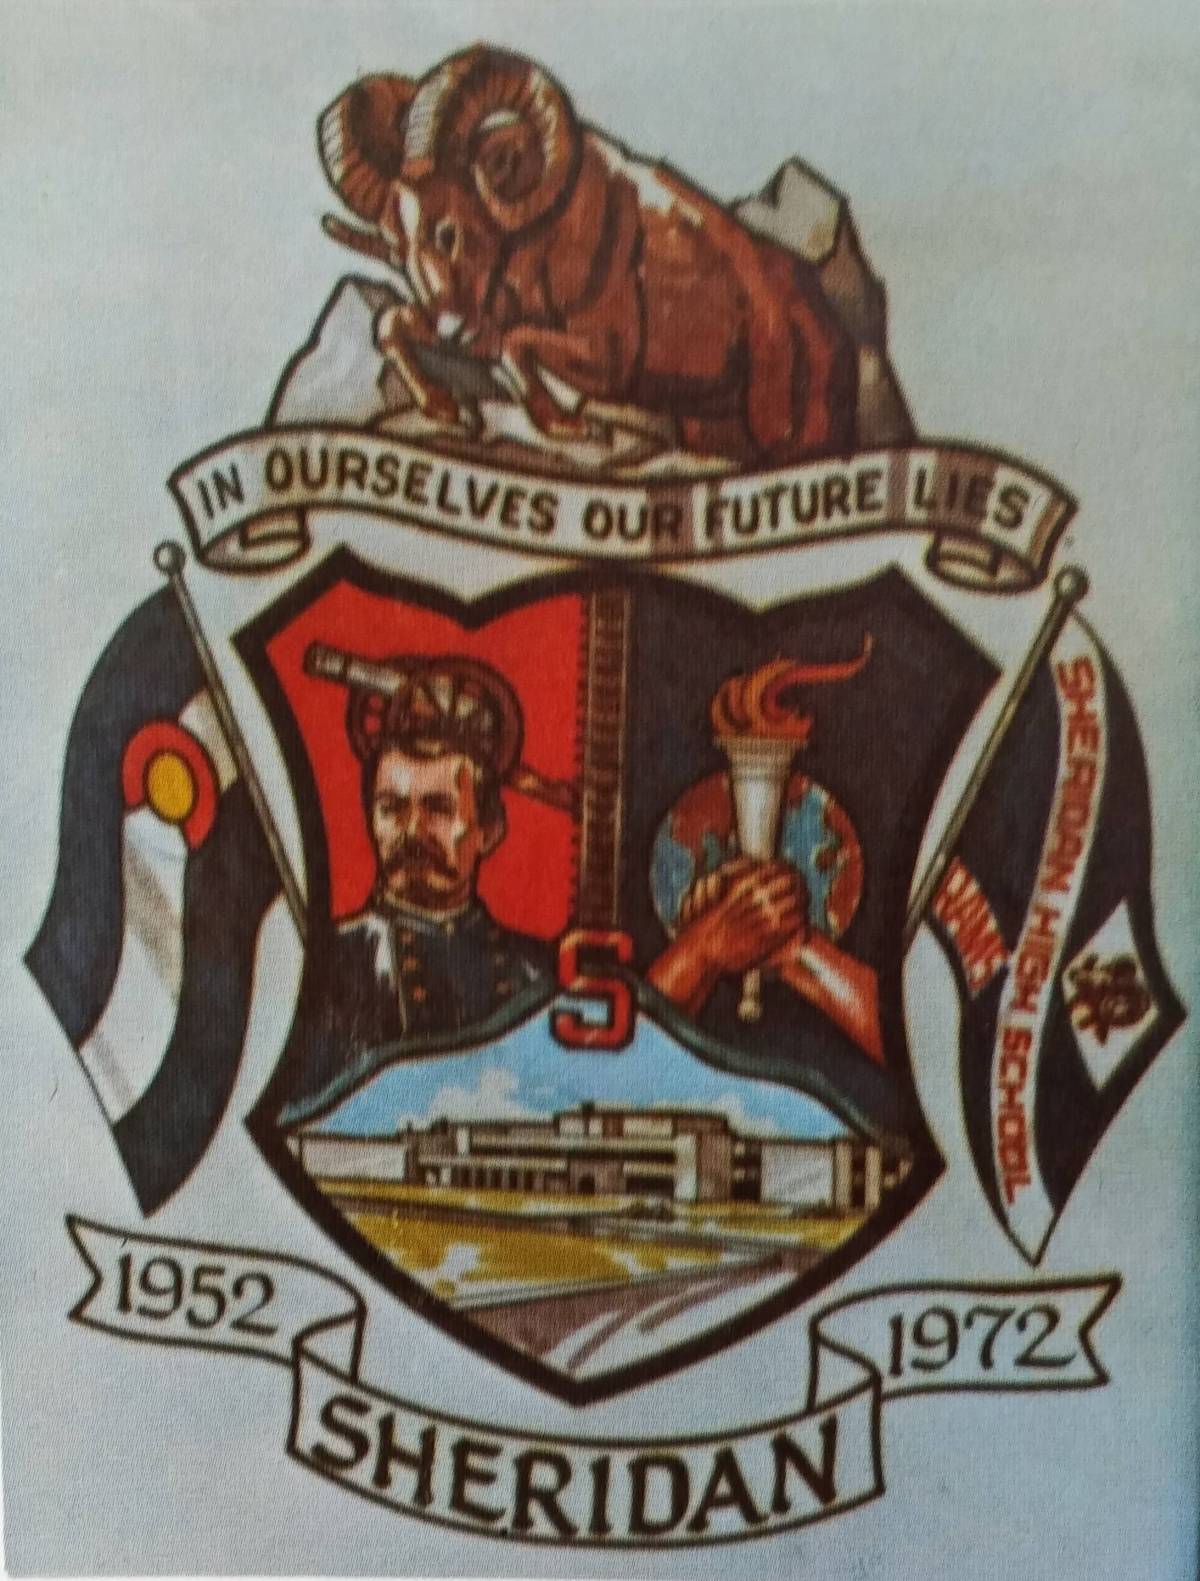 Picture of the Sheridan High School crest from the 1975 school annual.